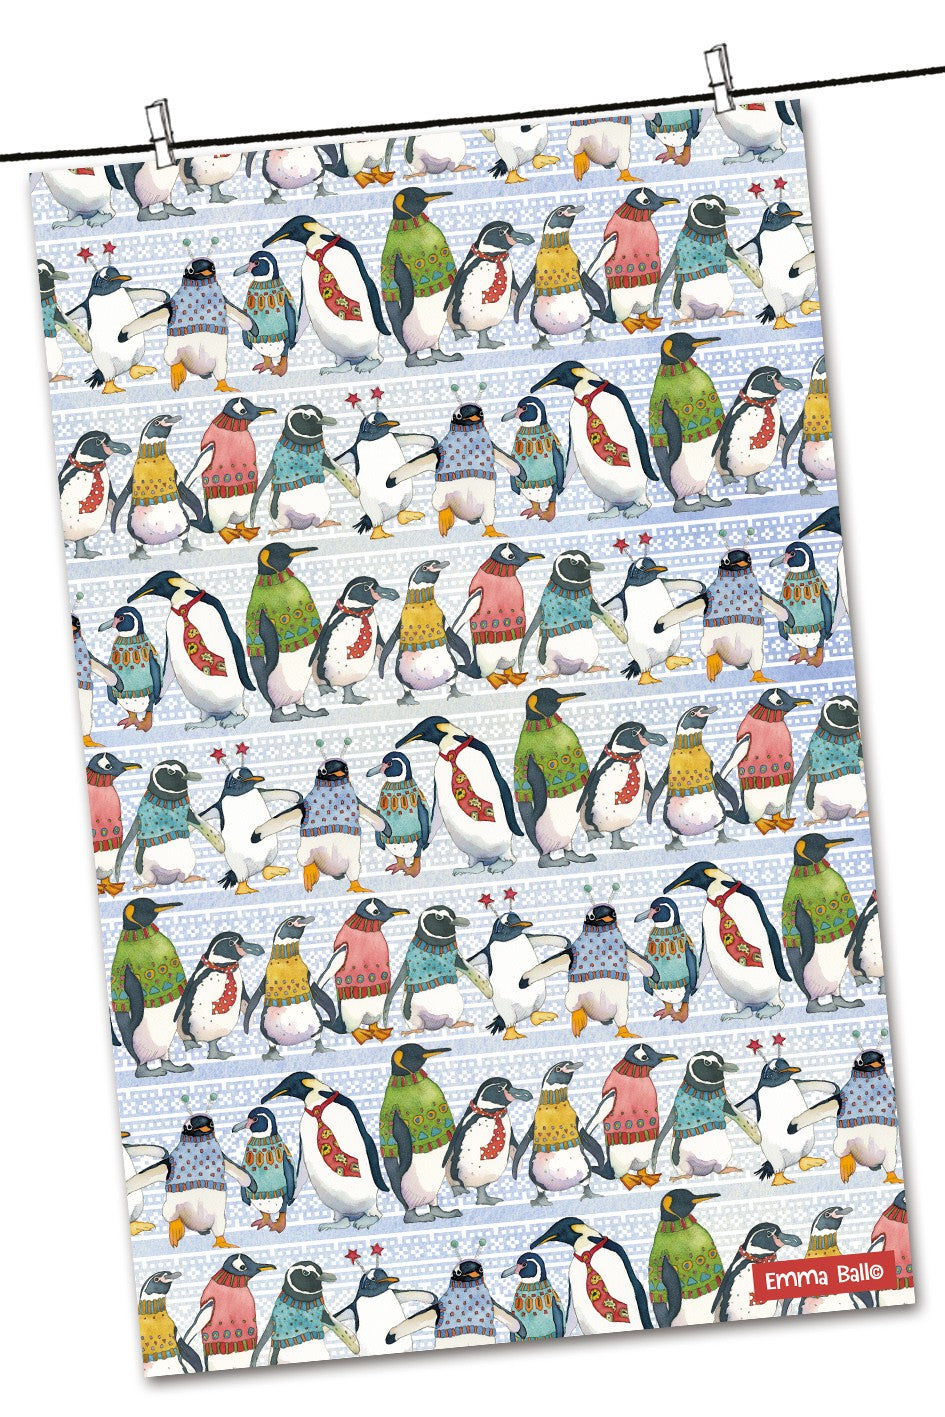 Emma Ball "Penguins in Pullovers", Pure cotton tea towel. Printed in the UK.